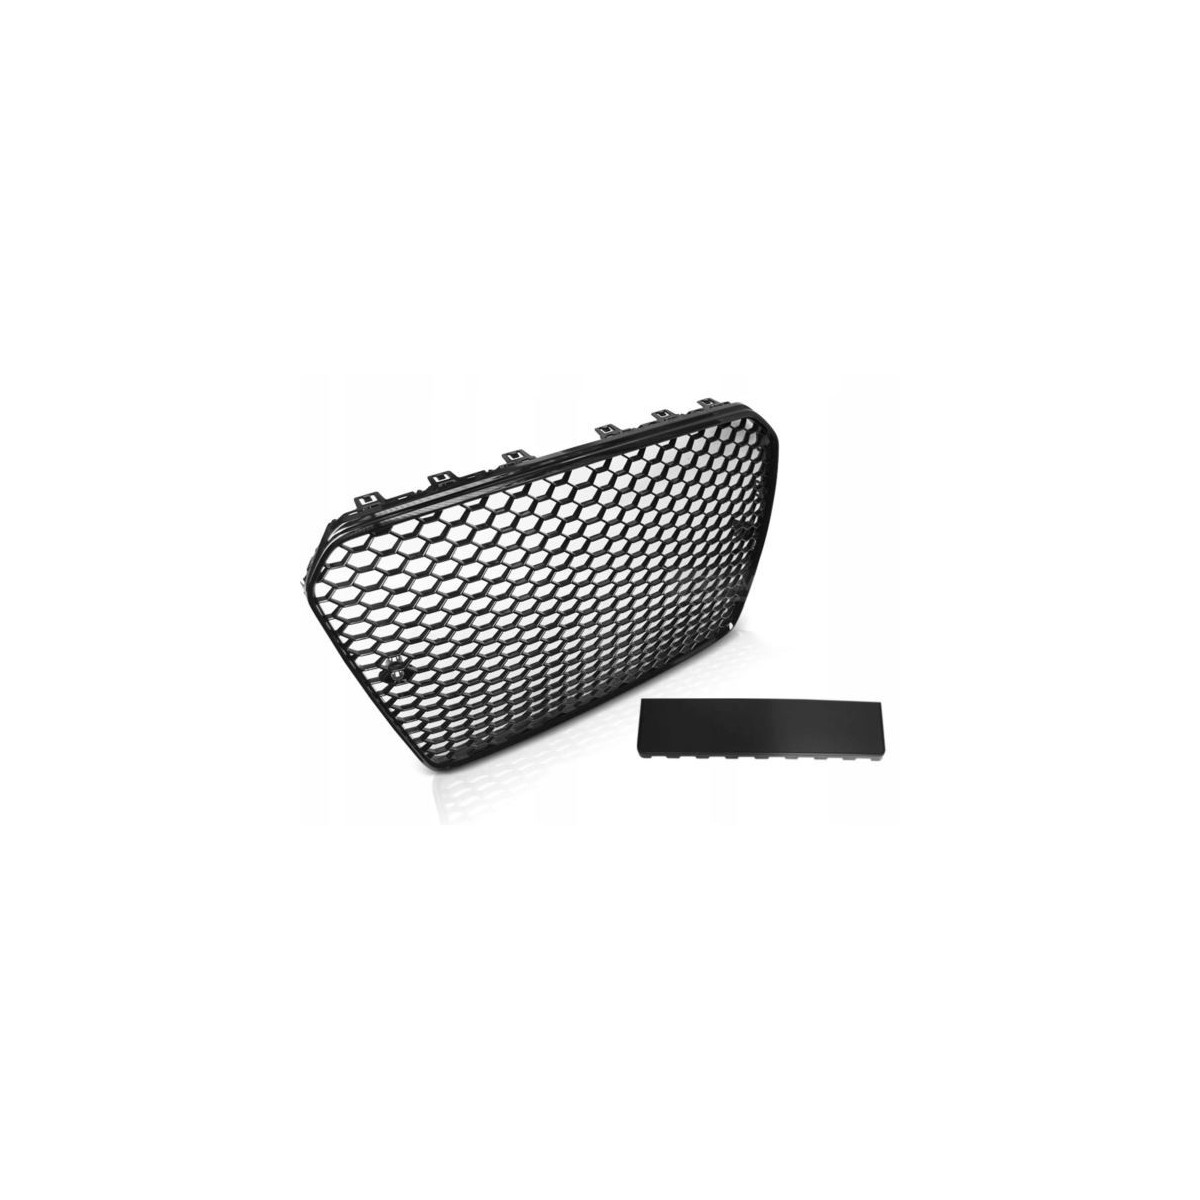 GRILL AUDI A5 11-16 RS5 STYLE GLOSSY BLACK